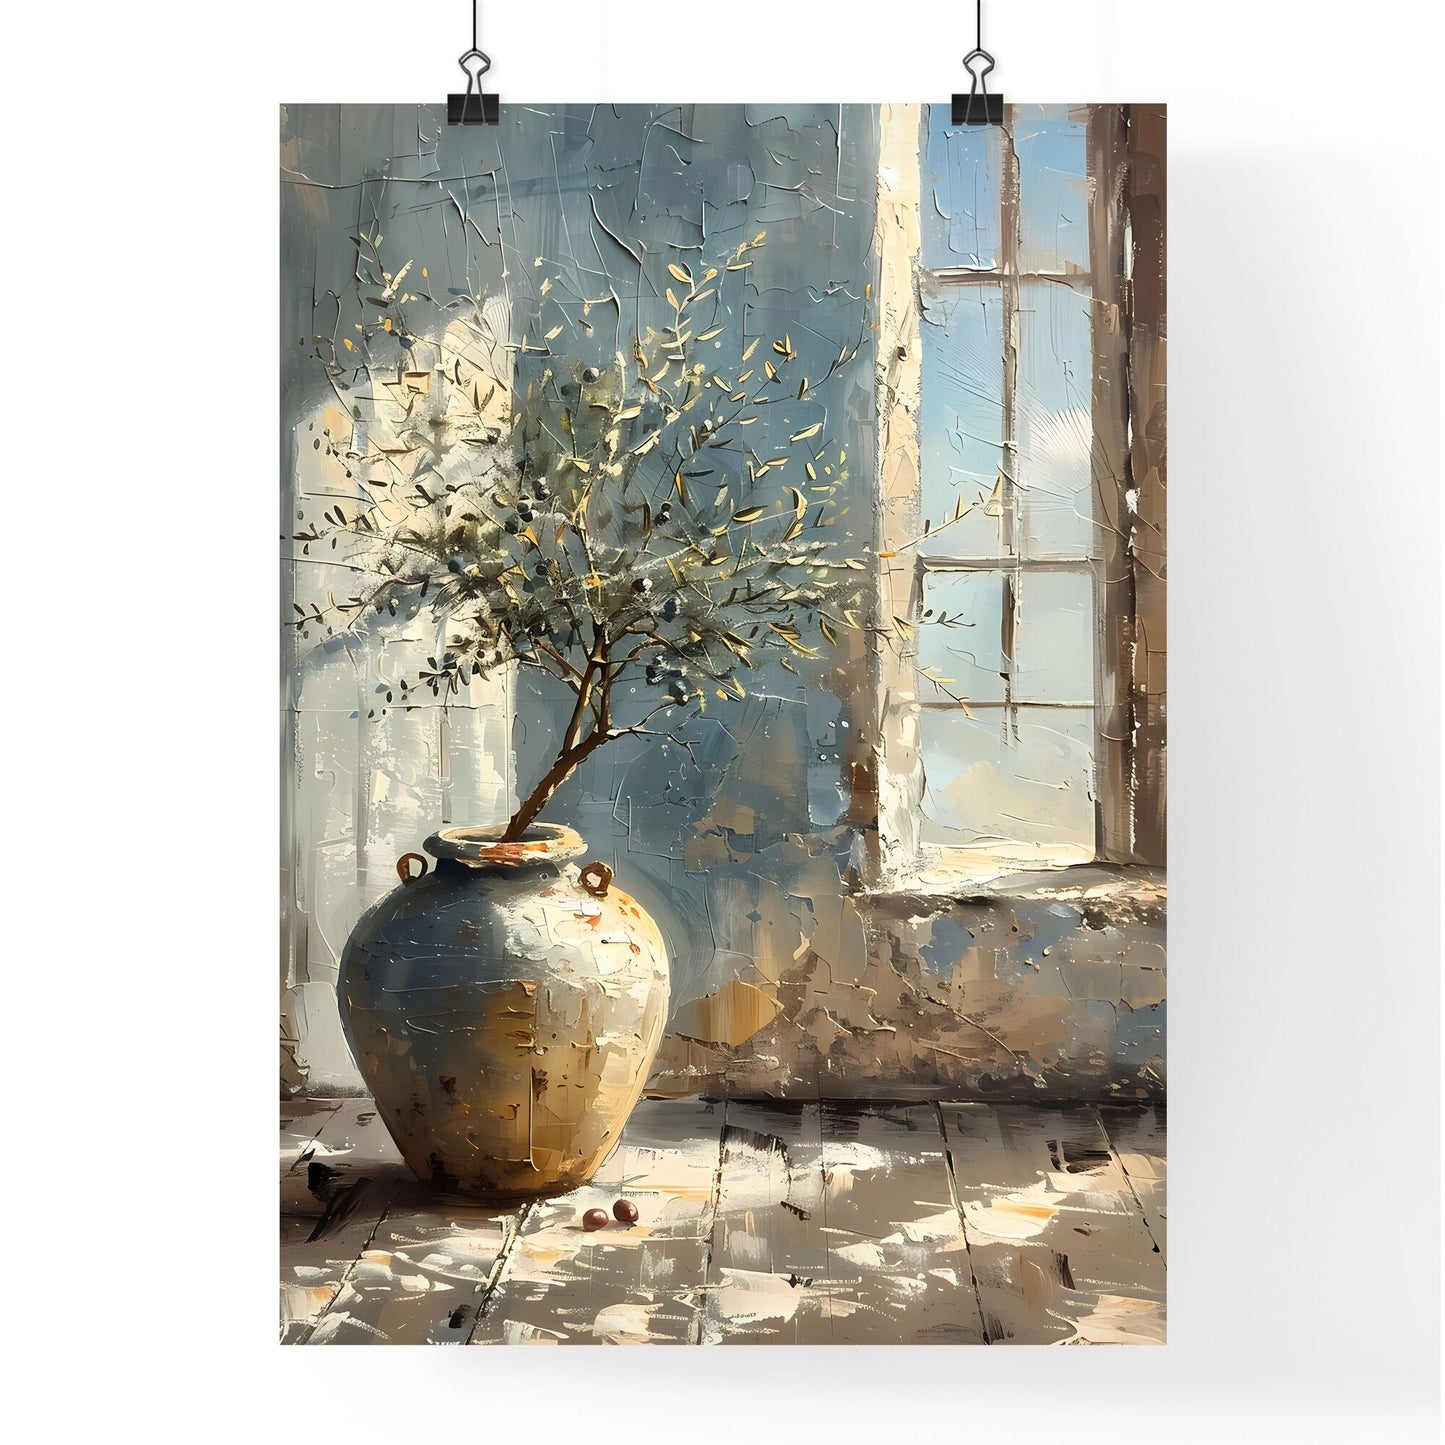 Captivating Vintage Oil Painting: Olive Tree in Whitewashed Pottery, Realistic Brushstrokes, Muted Colors, Art Print Default Title